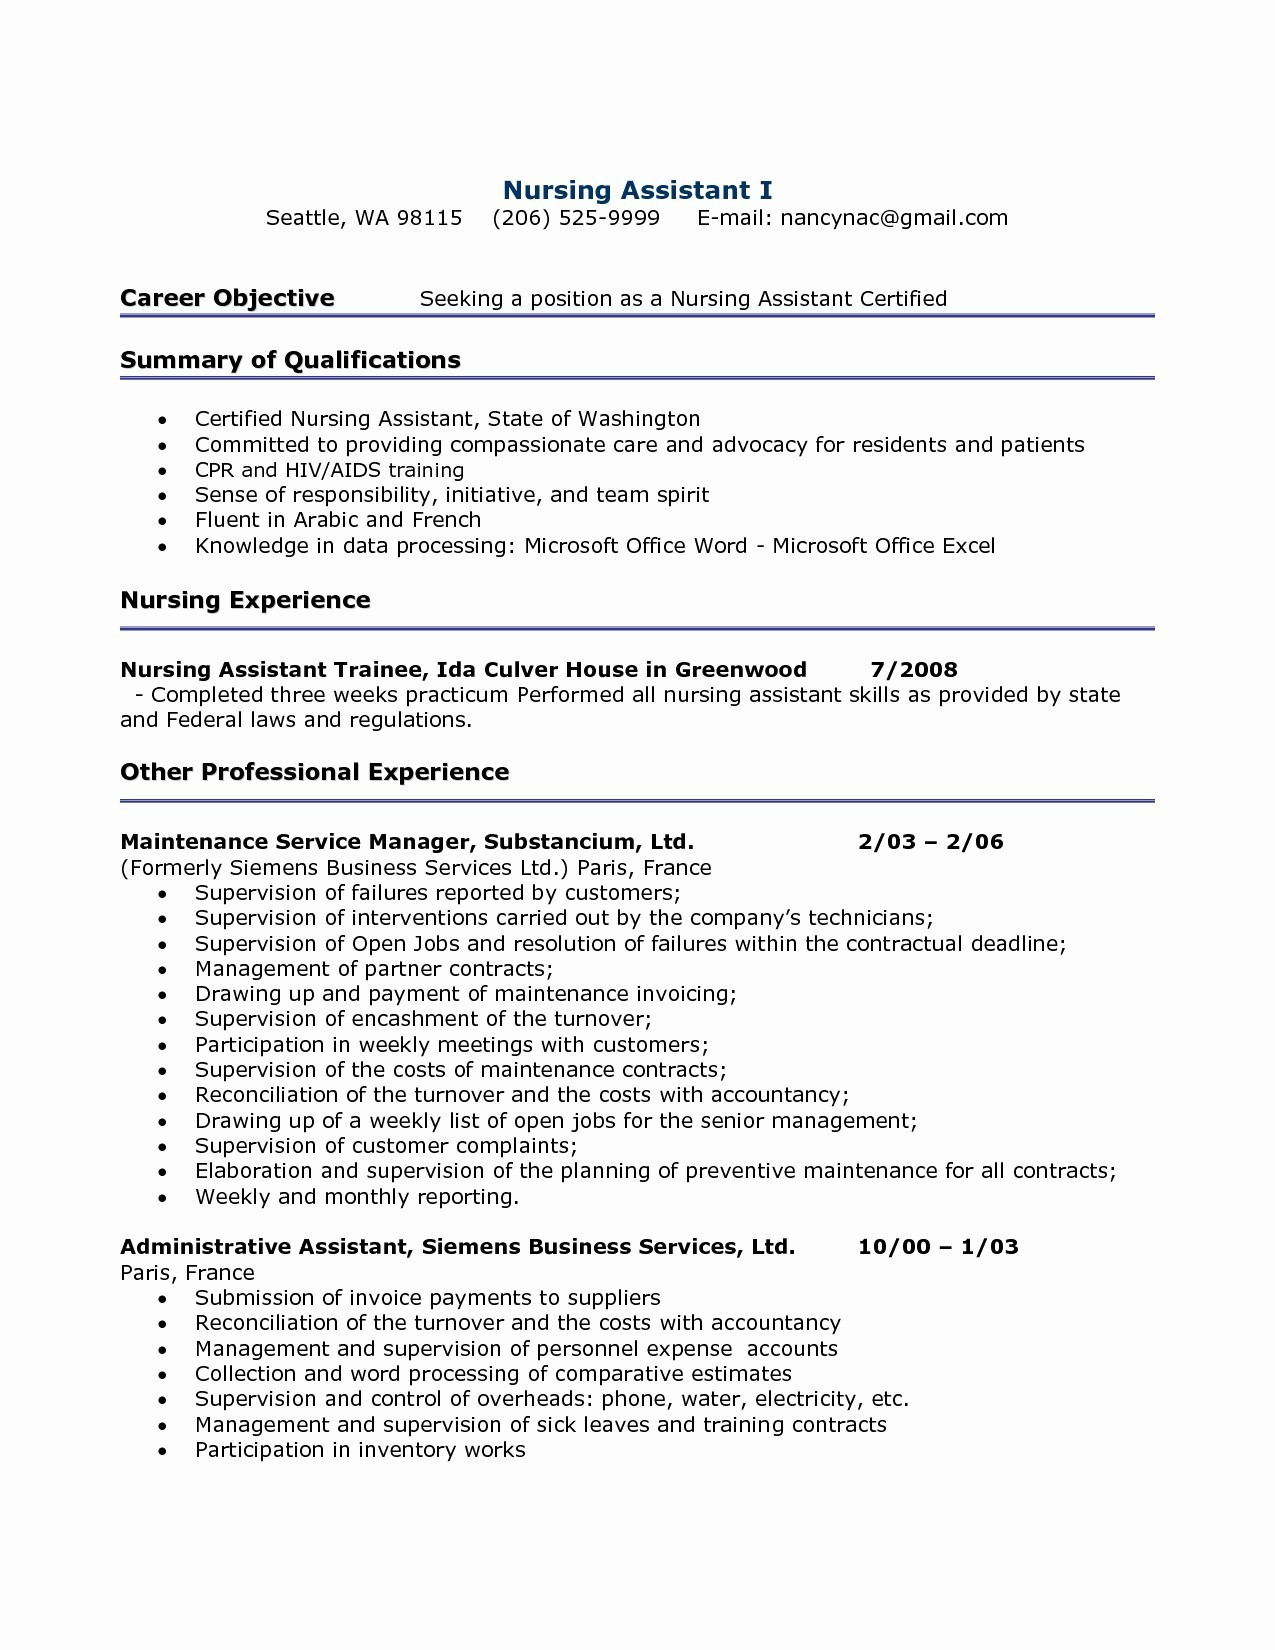 Will Serve Letter Template - Fice Resume Templates Unique Resume New Cover Letter Template